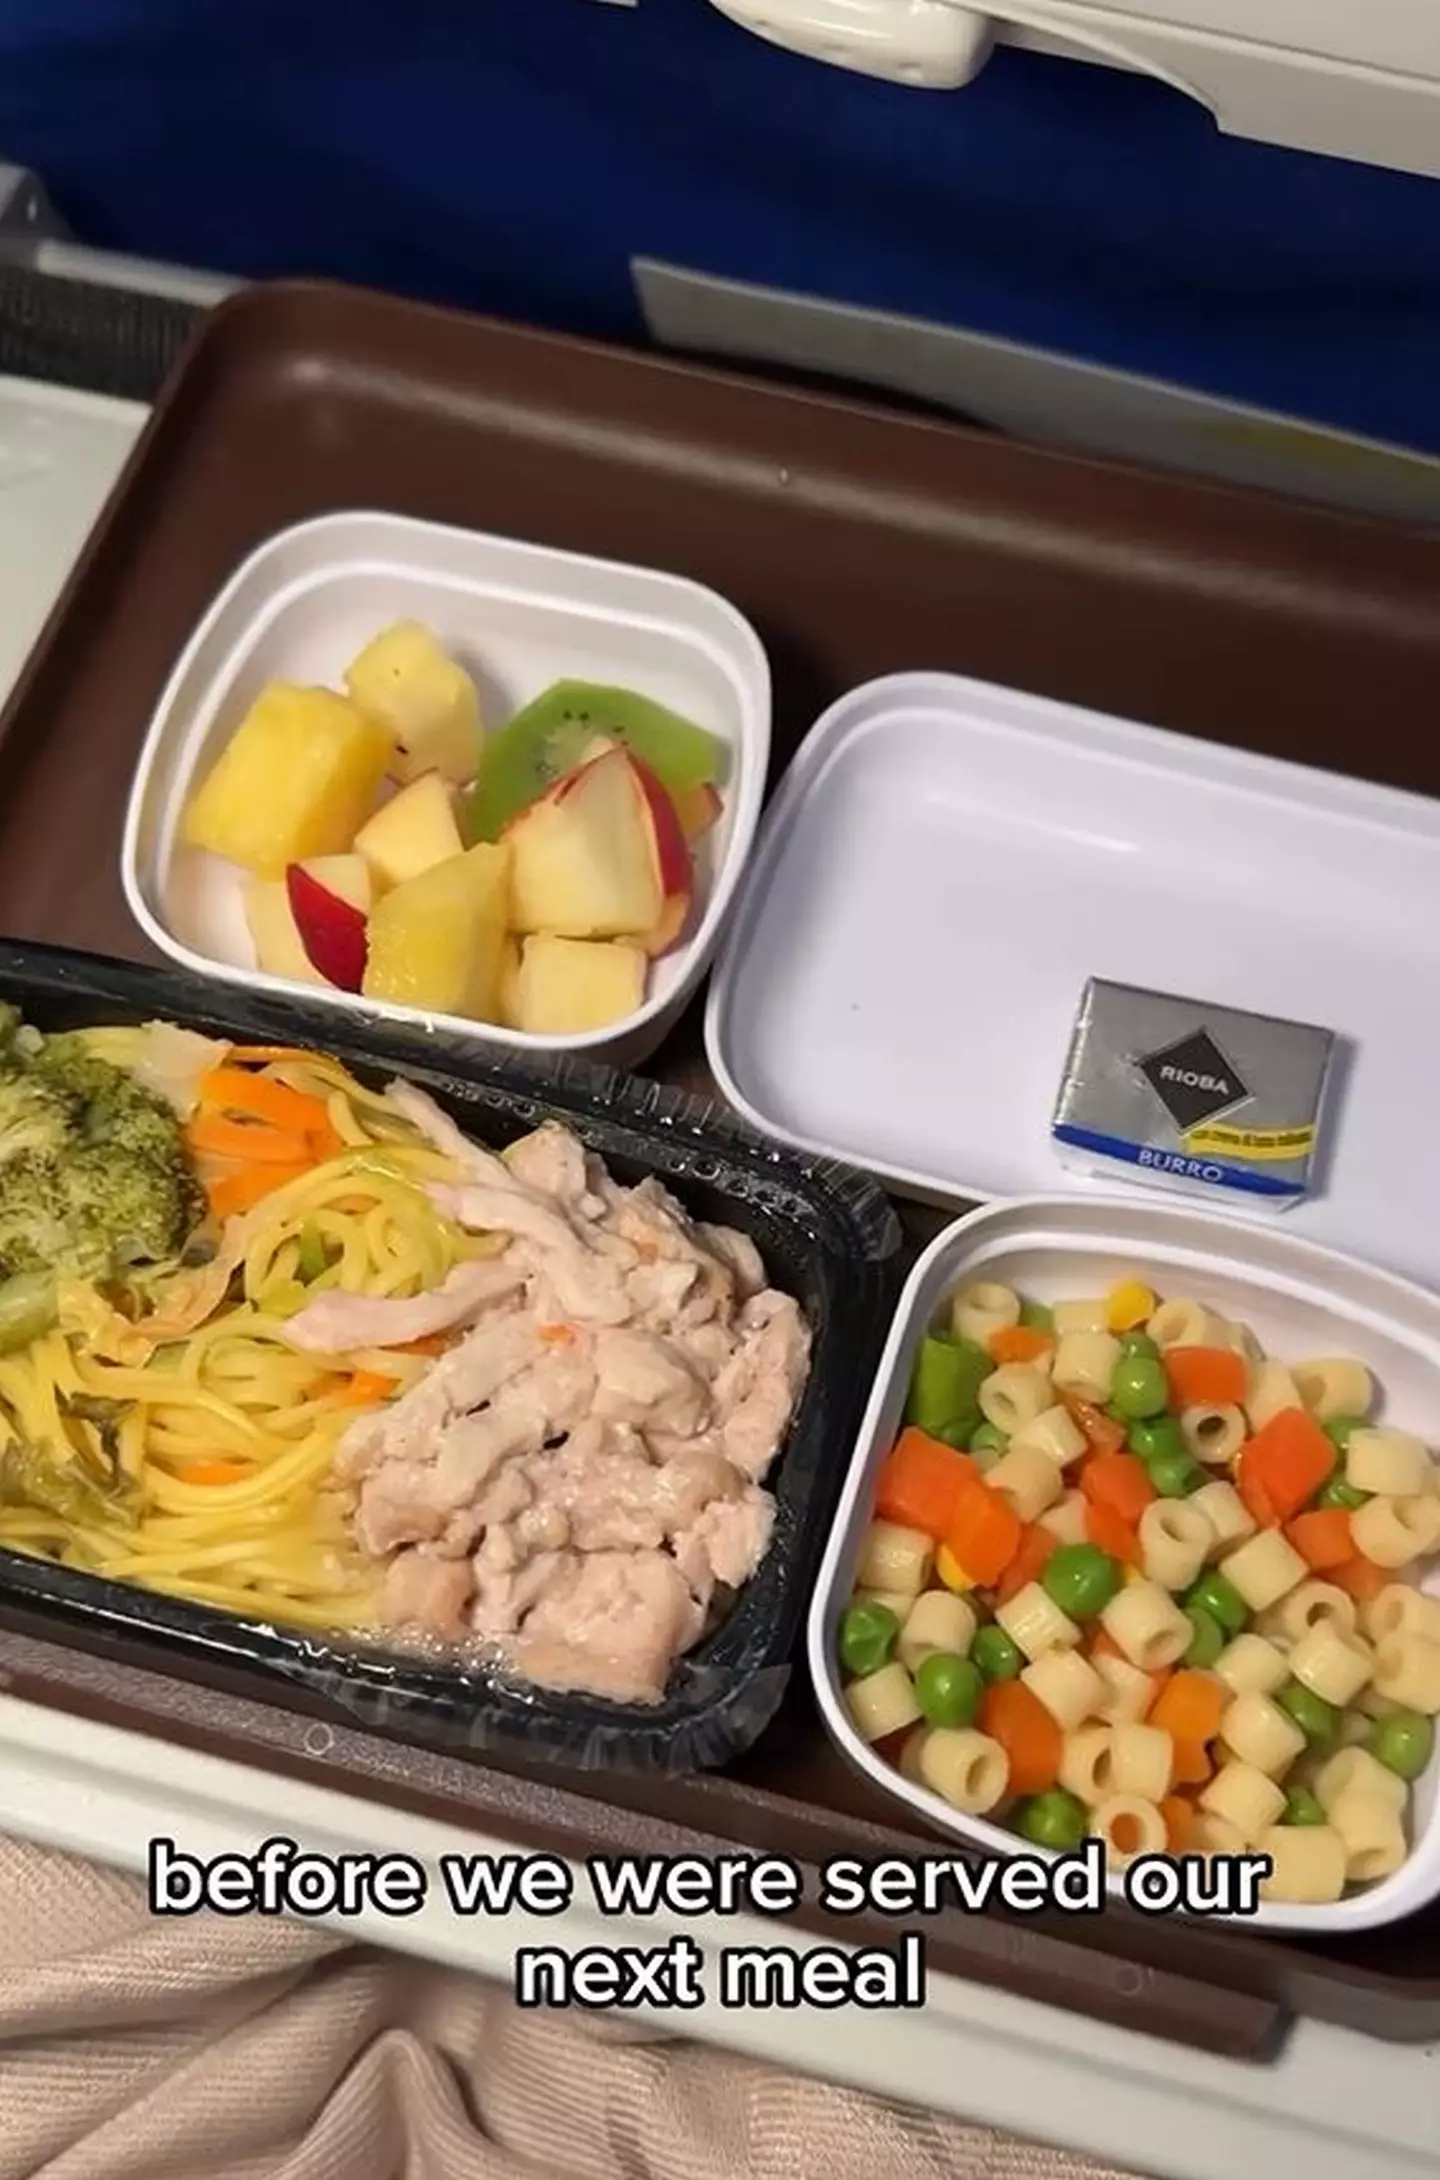 The foodie was served up some unappetising meals during the 28-hour journey.